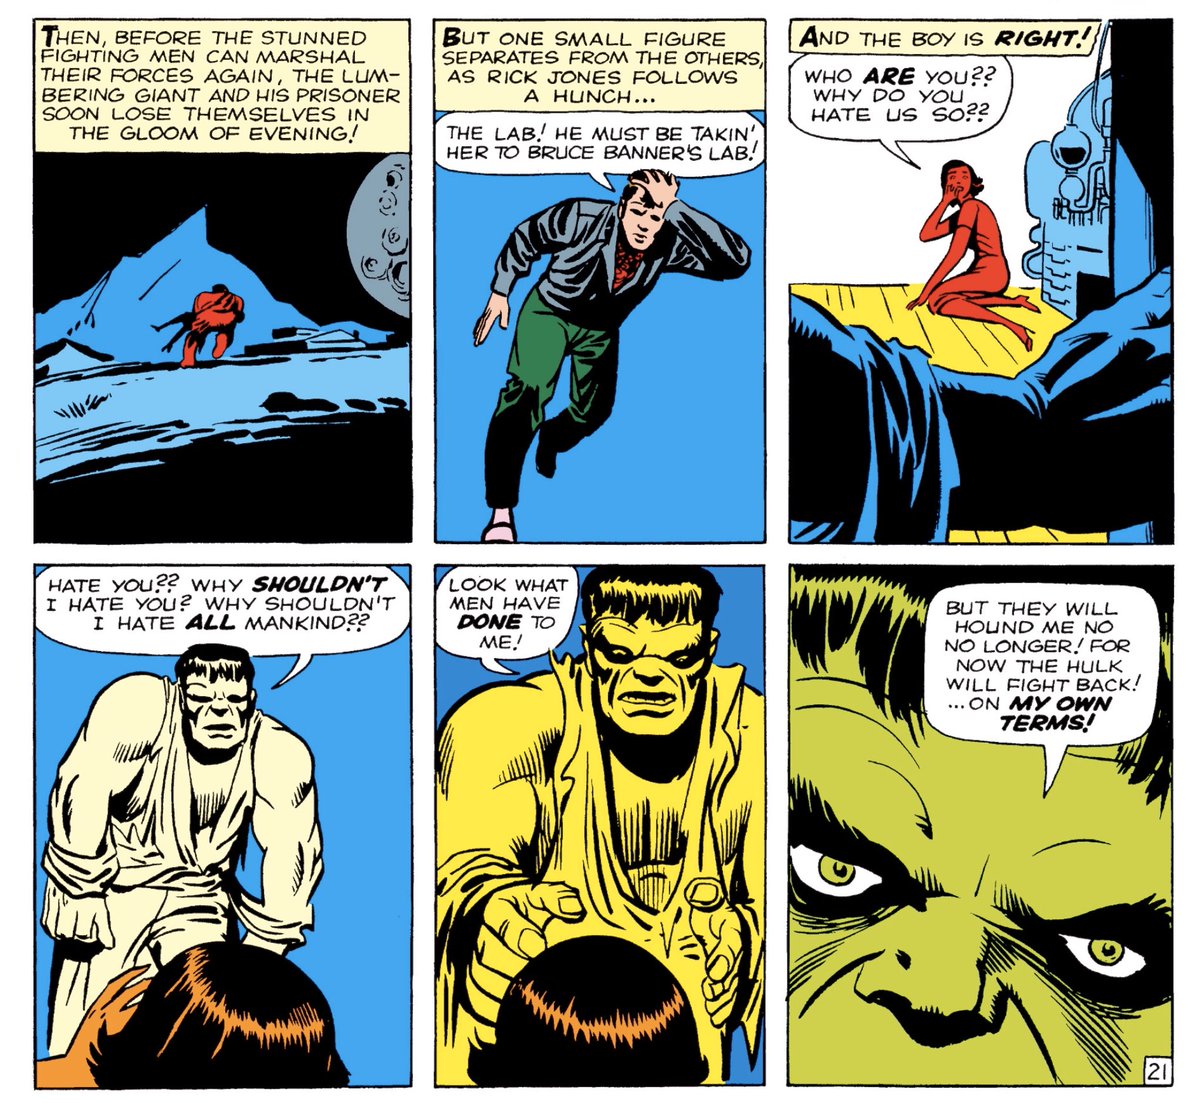 ...plus, the Hulk was a bit of a psychopath in these early Stan Lee comics, as he repeatedly states his intentions to conquer the world and destroy all of mankind.I guess the Ol’ Jolly Green Giant was more monster than man in his inception...